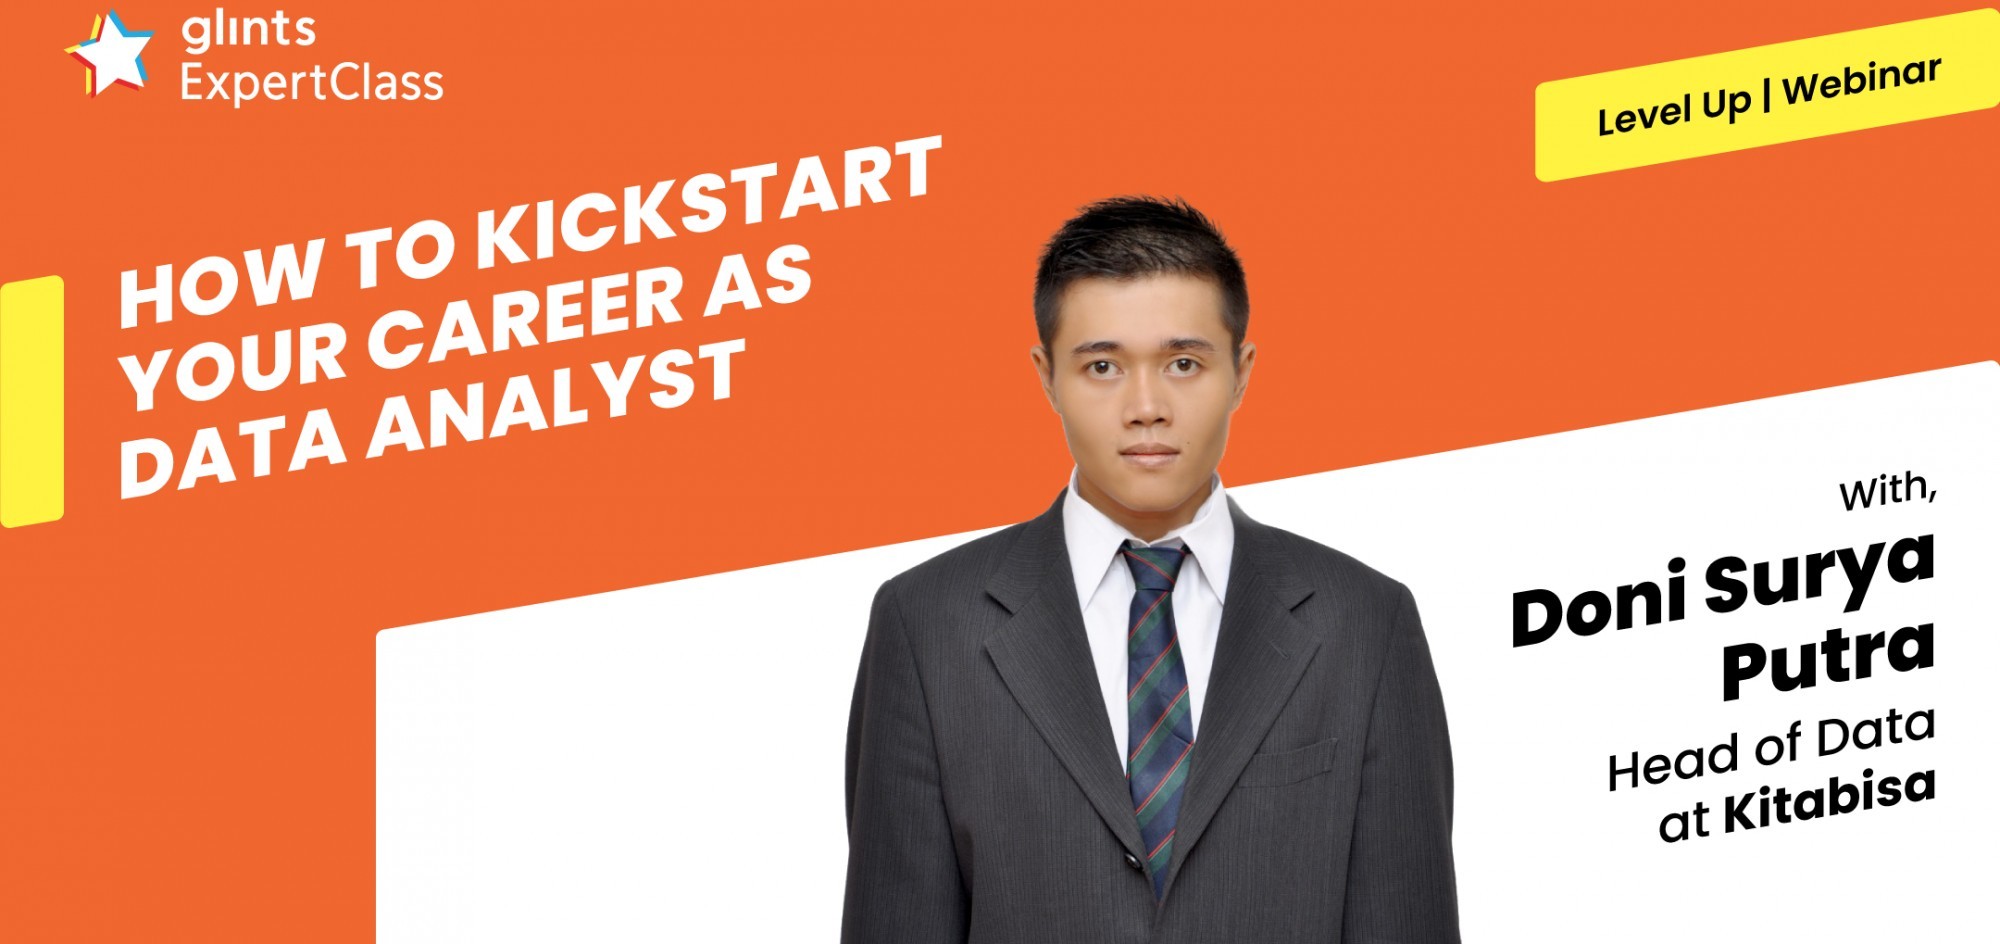 How To Kickstart Your Career As Data Analyst